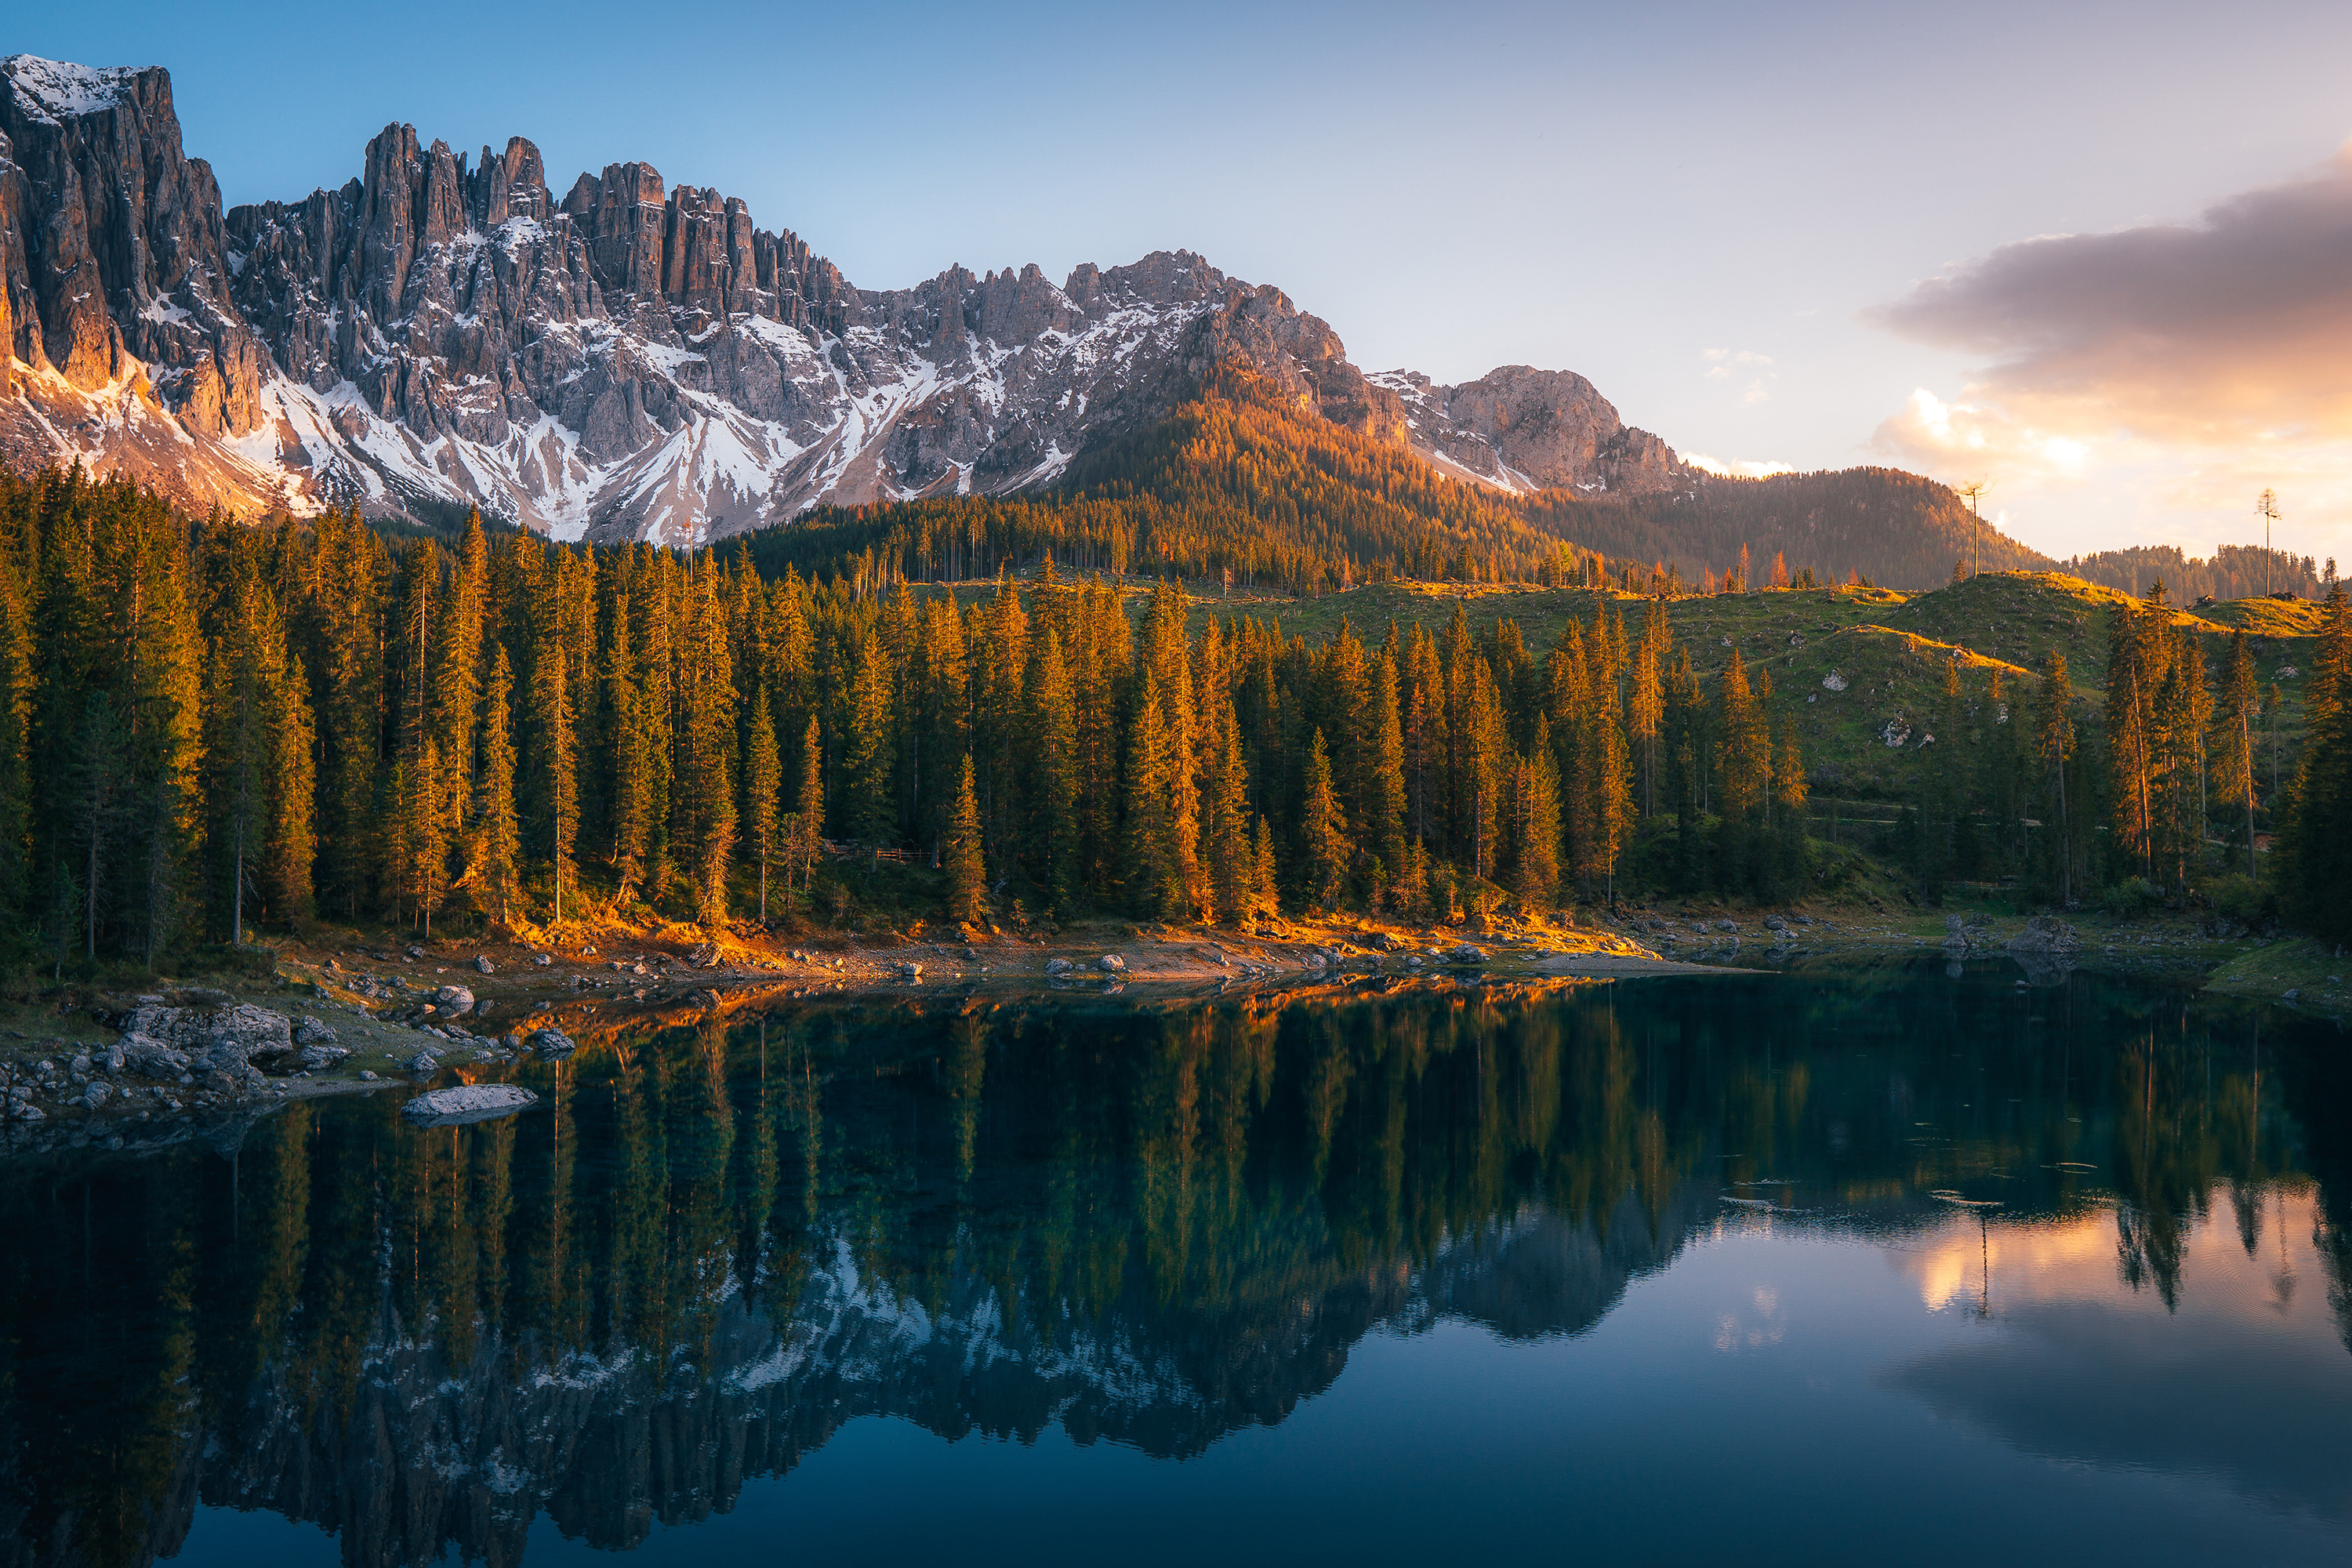 General 3000x2000 landscape nature forest mountains snow lake reflection water trees clouds sky Dolomites Italy South Tyrol Tyrol